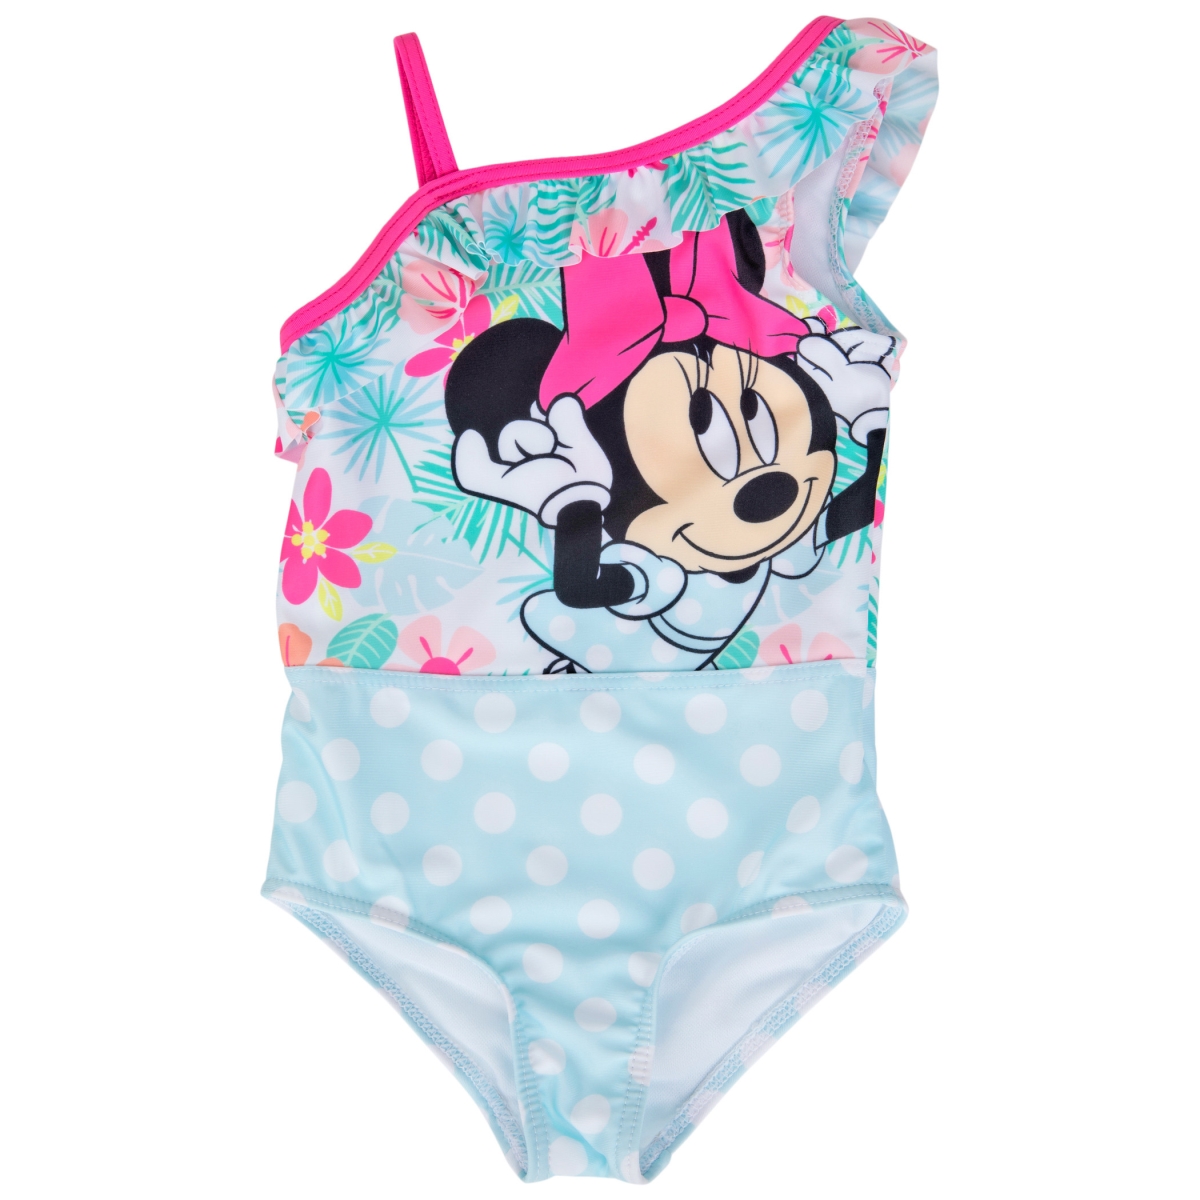 830061-toddler4t  Minnie Mouse Floral Toddler One Piece Swimsuit - Toddler 4T -  Disney